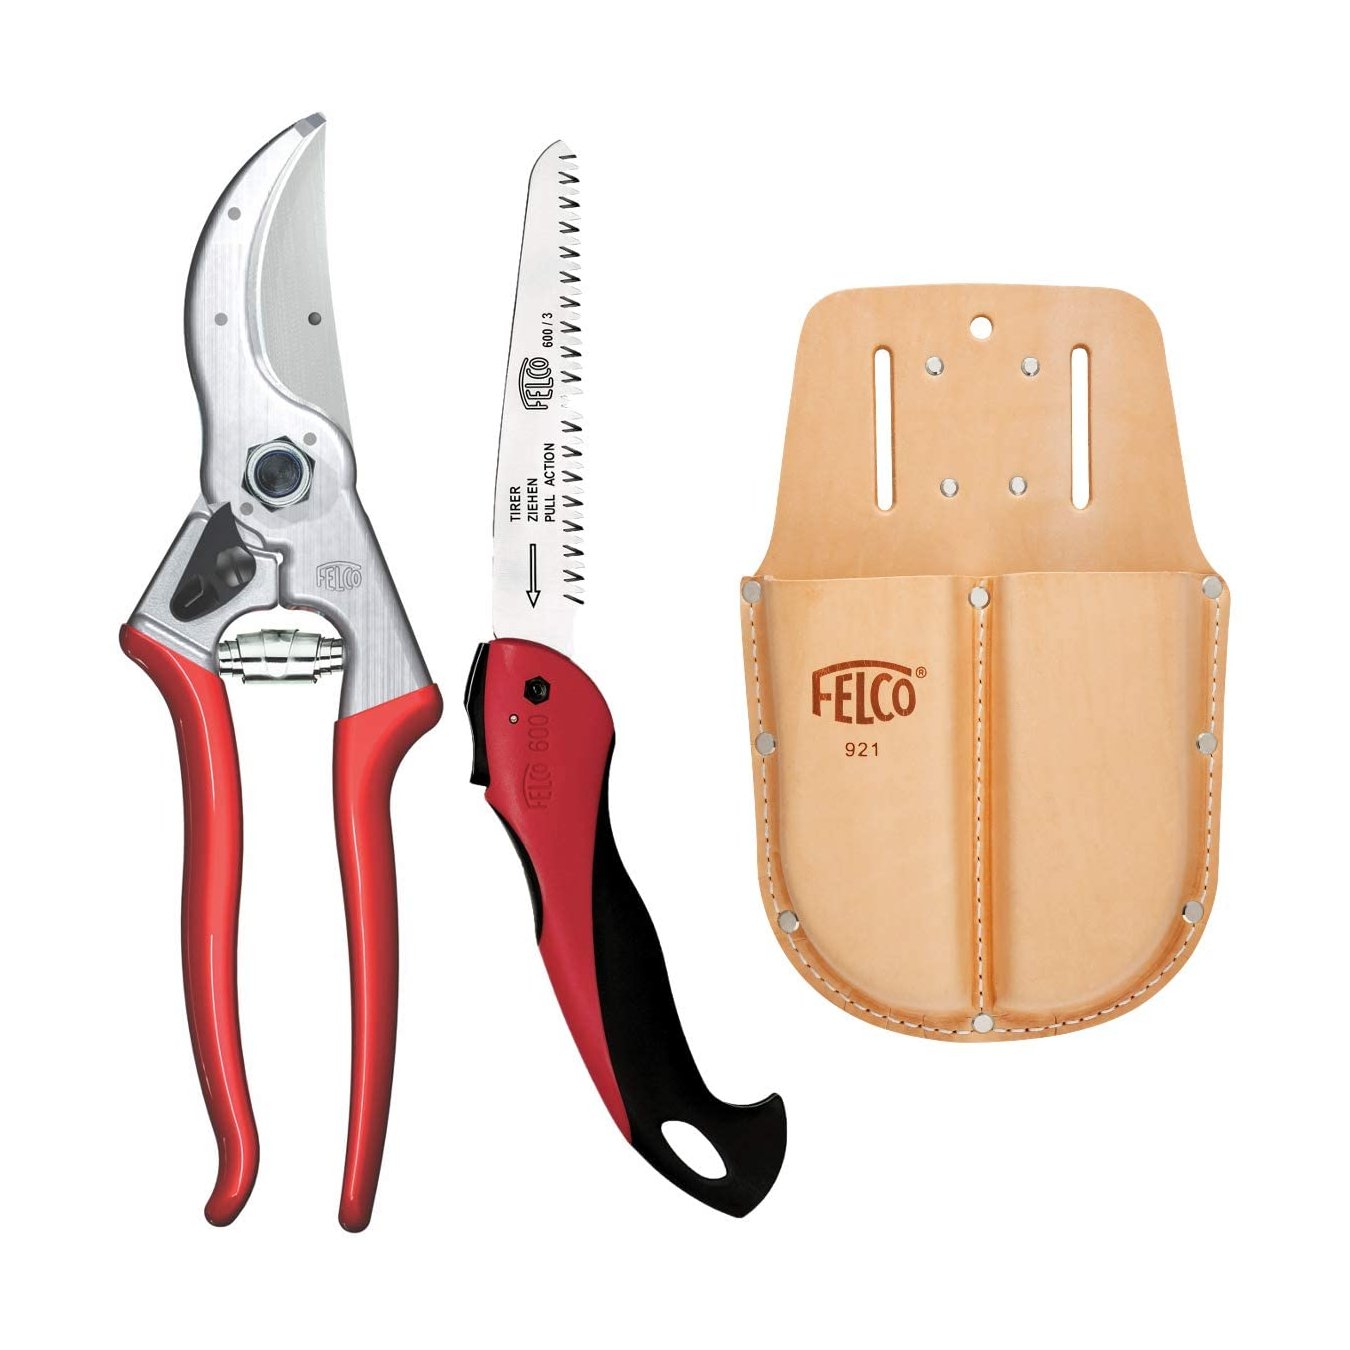 Genuine Felco Model 4 secateurs with folding saw + double holster official Felco - official Felco stockist